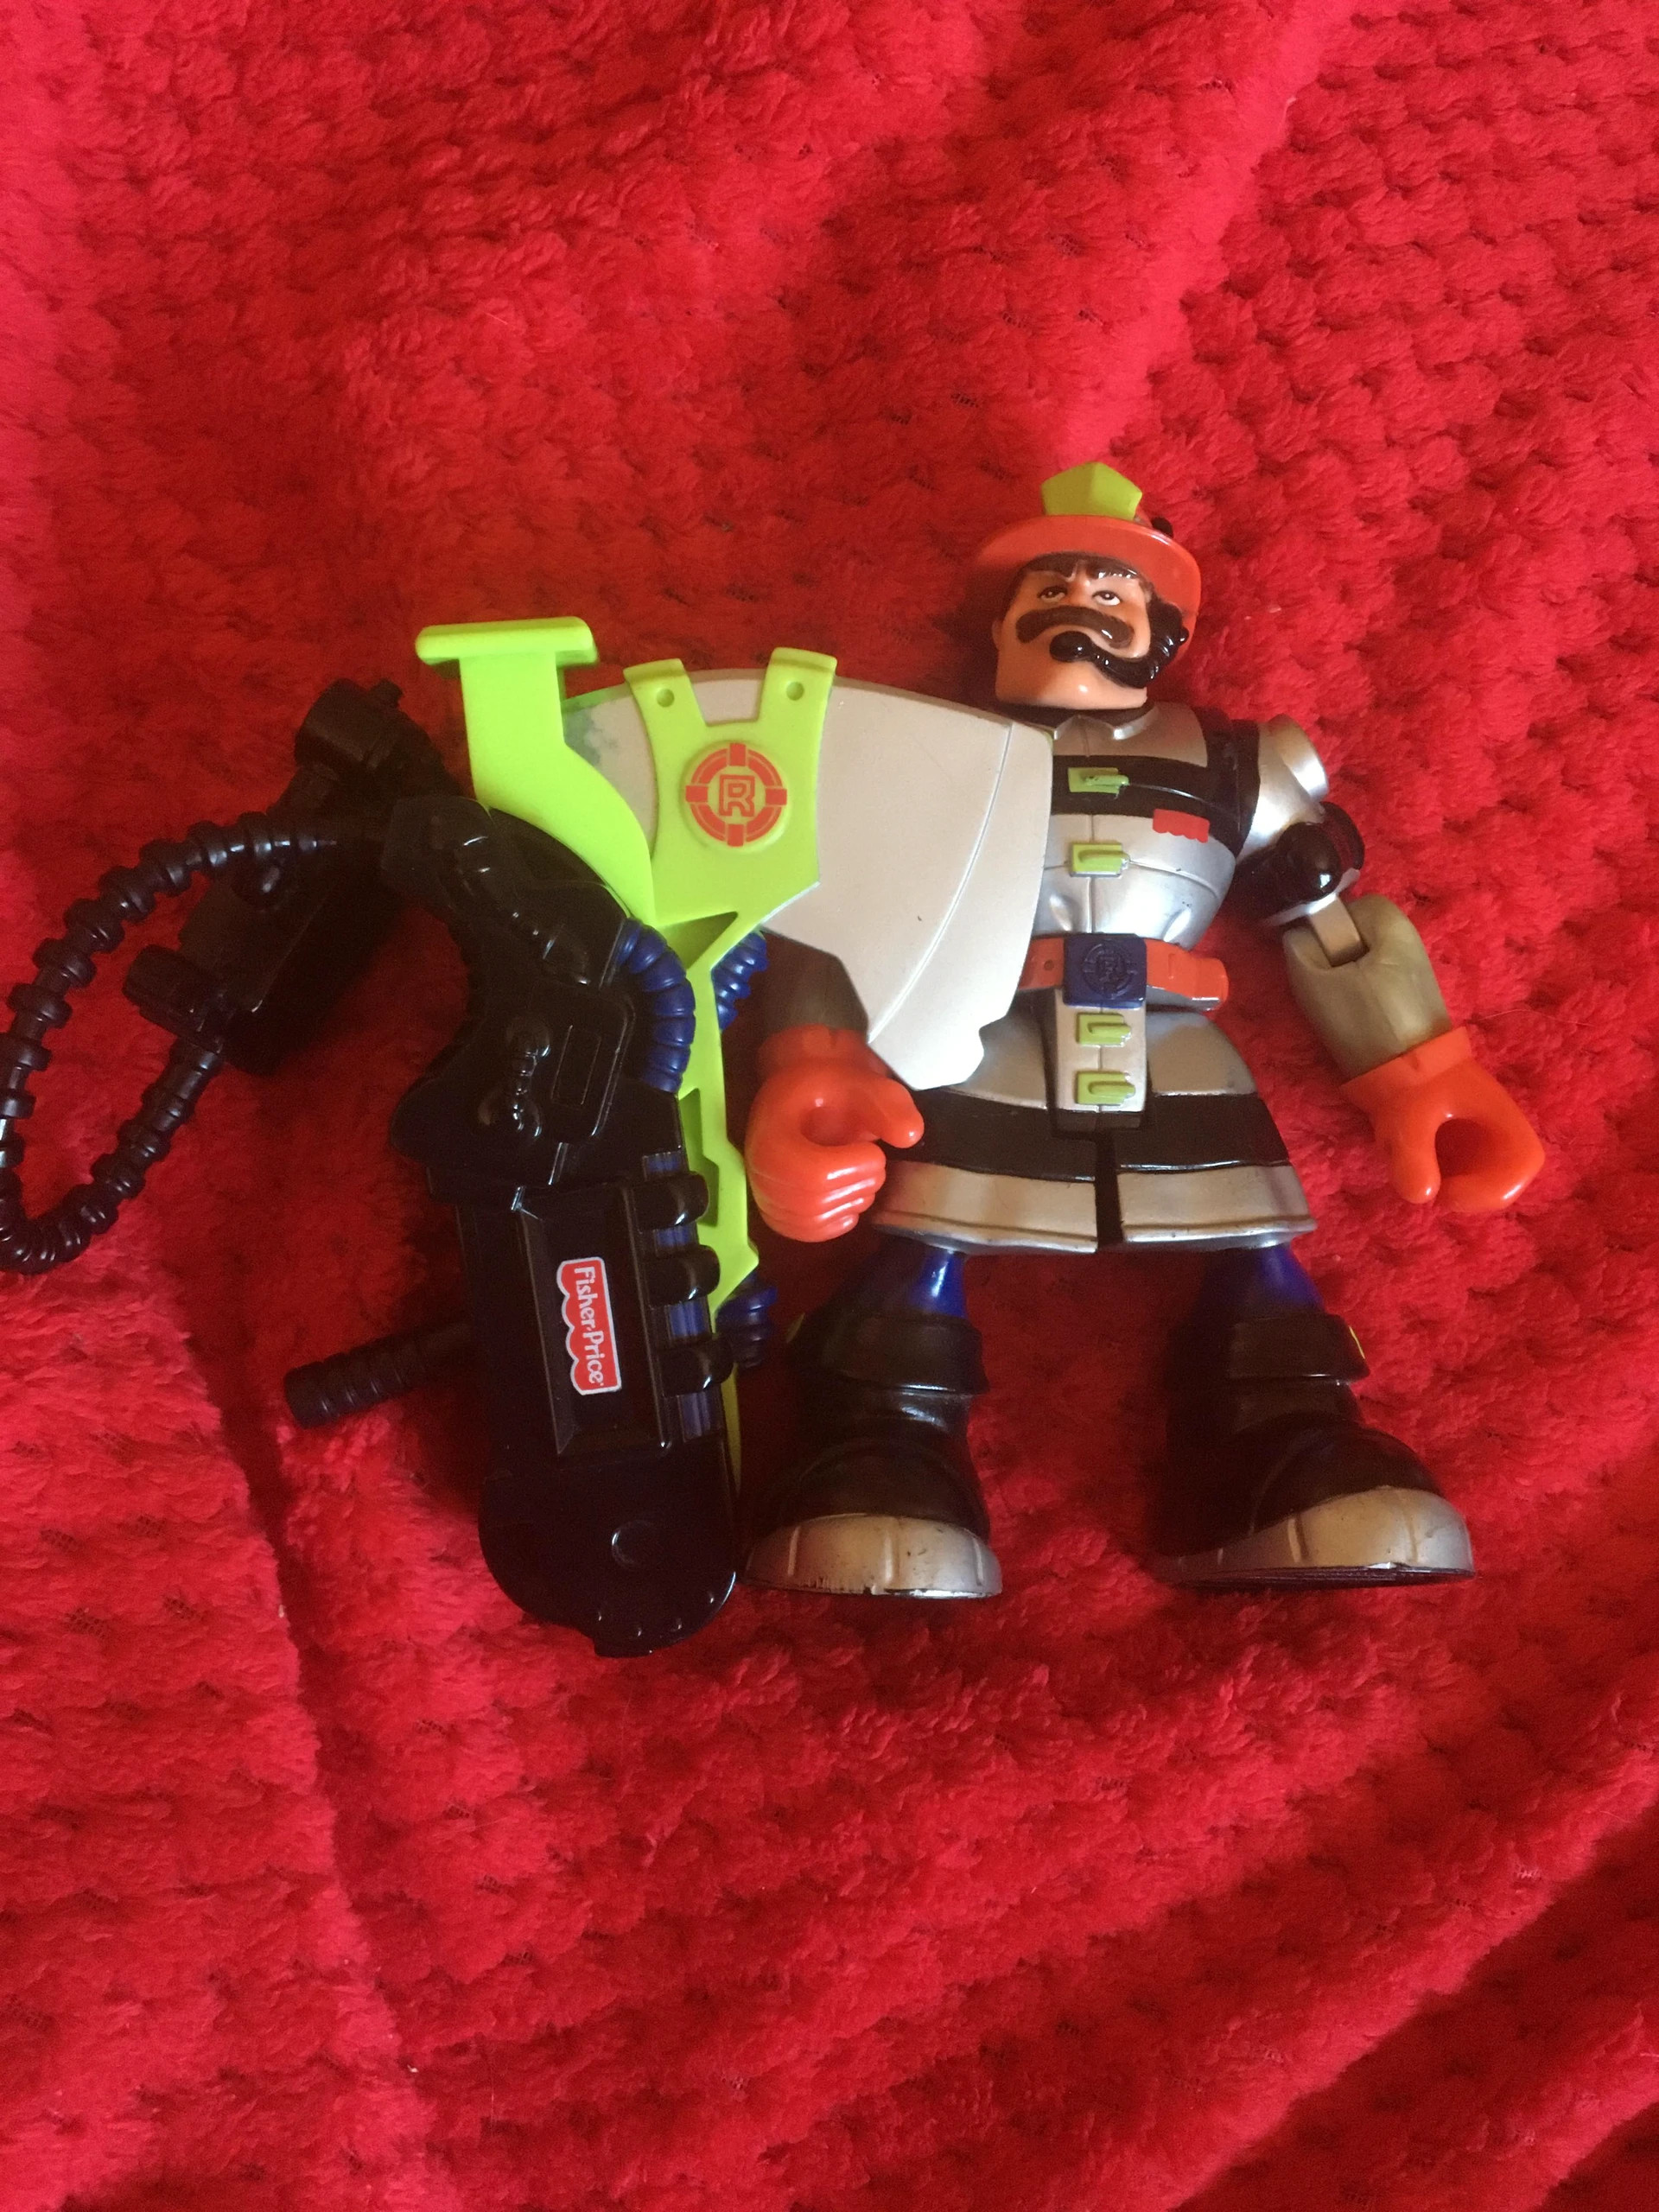 This Old Toy's Fisher-Price Rescue Heroes Equipment Pack Identification